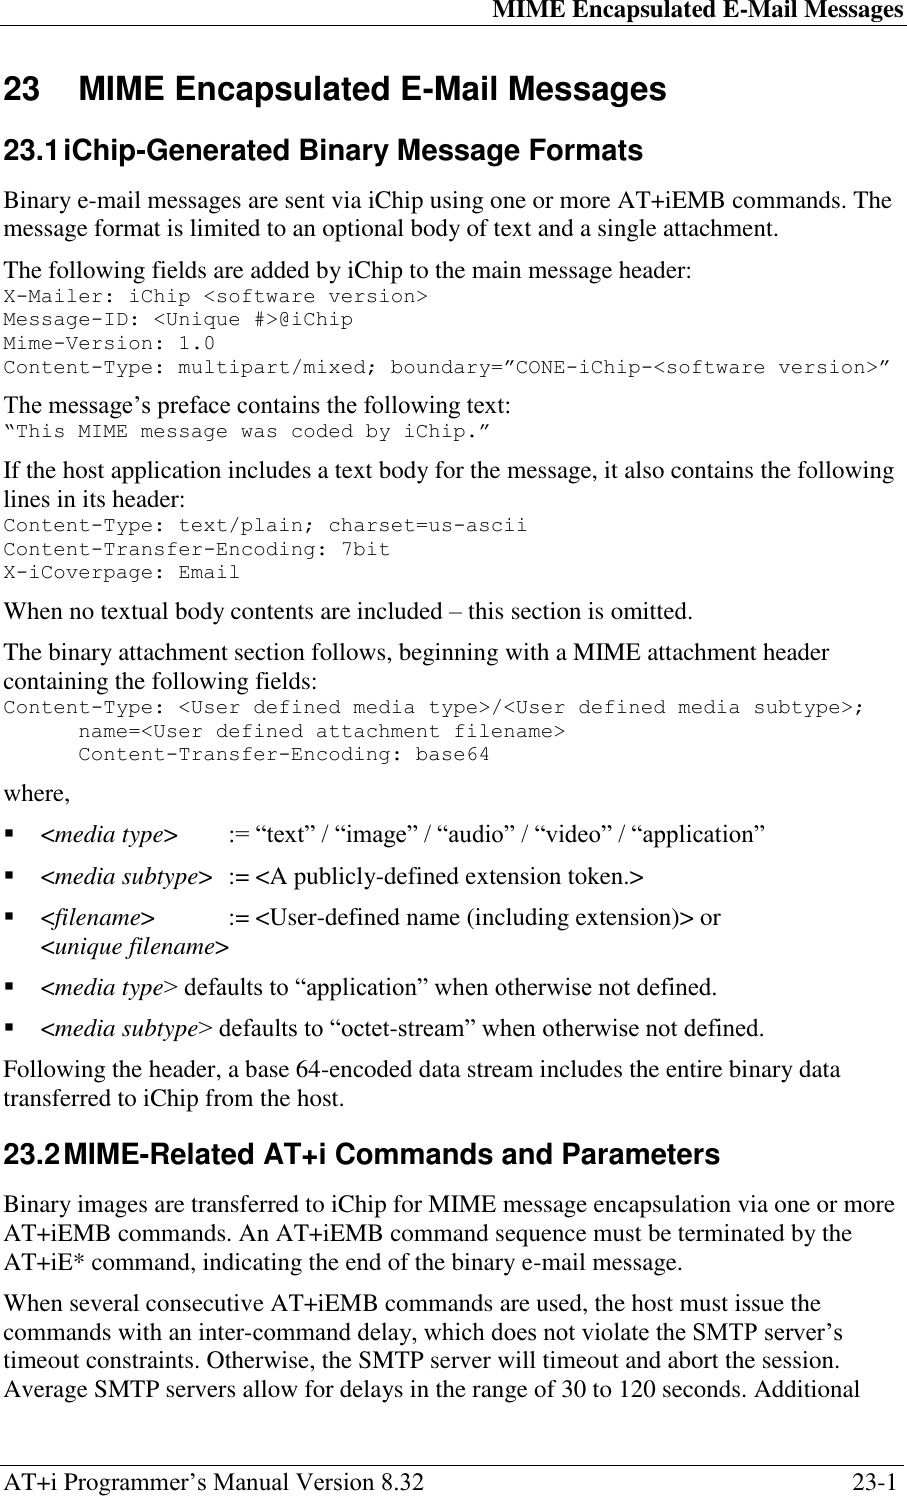 MIME Encapsulated E-Mail Messages AT+i Programmer‘s Manual Version 8.32  23-1 23  MIME Encapsulated E-Mail Messages   23.1 iChip-Generated Binary Message Formats  Binary e-mail messages are sent via iChip using one or more AT+iEMB commands. The message format is limited to an optional body of text and a single attachment. The following fields are added by iChip to the main message header: X-Mailer: iChip &lt;software version&gt; Message-ID: &lt;Unique #&gt;@iChip Mime-Version: 1.0 Content-Type: multipart/mixed; boundary=”CONE-iChip-&lt;software version&gt;” The message‘s preface contains the following text: “This MIME message was coded by iChip.” If the host application includes a text body for the message, it also contains the following lines in its header: Content-Type: text/plain; charset=us-ascii Content-Transfer-Encoding: 7bit X-iCoverpage: Email When no textual body contents are included – this section is omitted. The binary attachment section follows, beginning with a MIME attachment header containing the following fields: Content-Type: &lt;User defined media type&gt;/&lt;User defined media subtype&gt;; name=&lt;User defined attachment filename&gt; Content-Transfer-Encoding: base64 where,  &lt;media type&gt;  := ―text‖ / ―image‖ / ―audio‖ / ―video‖ / ―application‖  &lt;media subtype&gt;  := &lt;A publicly-defined extension token.&gt;  &lt;filename&gt;   := &lt;User-defined name (including extension)&gt; or &lt;unique filename&gt;  &lt;media type&gt; defaults to ―application‖ when otherwise not defined.  &lt;media subtype&gt; defaults to ―octet-stream‖ when otherwise not defined. Following the header, a base 64-encoded data stream includes the entire binary data transferred to iChip from the host. 23.2 MIME-Related AT+i Commands and Parameters  Binary images are transferred to iChip for MIME message encapsulation via one or more AT+iEMB commands. An AT+iEMB command sequence must be terminated by the AT+iE* command, indicating the end of the binary e-mail message. When several consecutive AT+iEMB commands are used, the host must issue the commands with an inter-command delay, which does not violate the SMTP server‘s timeout constraints. Otherwise, the SMTP server will timeout and abort the session. Average SMTP servers allow for delays in the range of 30 to 120 seconds. Additional 